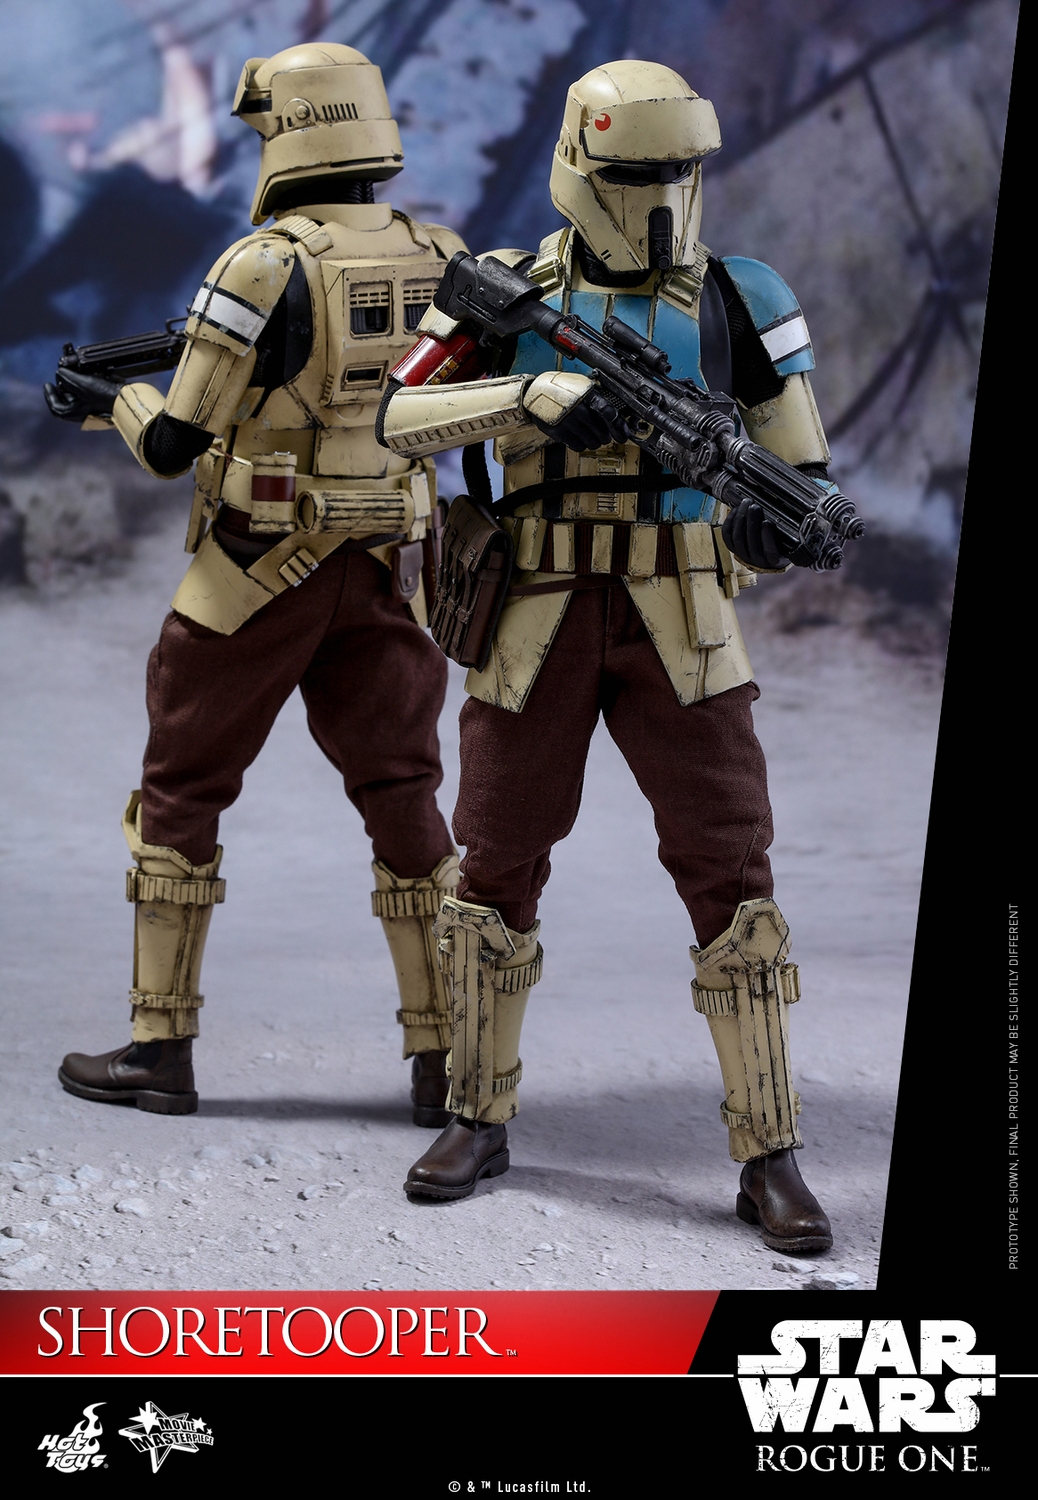 hot-toys-star-wars-rogue-one-shoretrooper-collectible-figure-092916-015.jpg